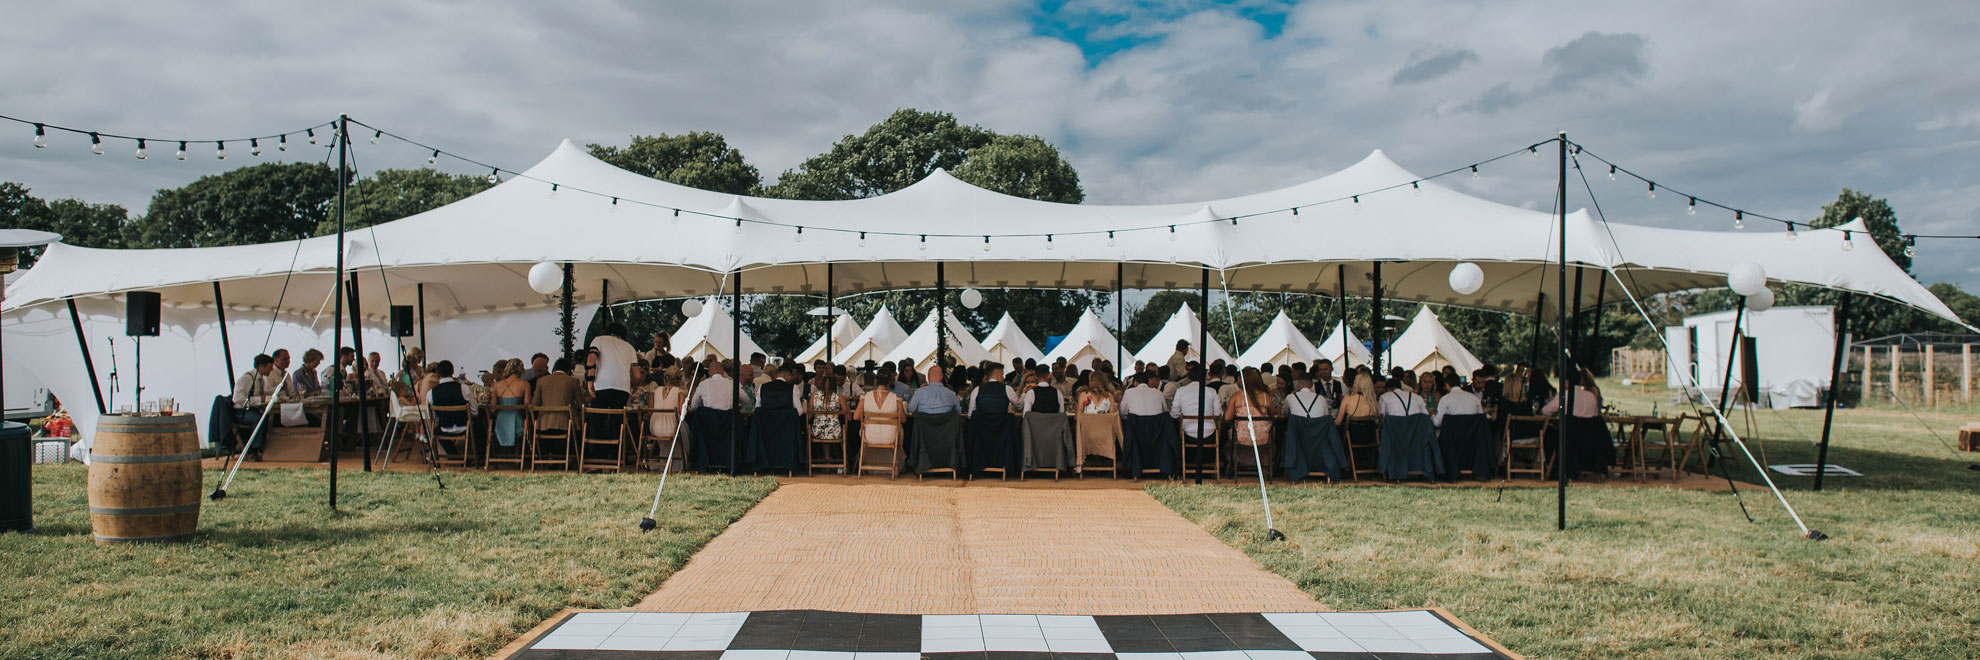 Large white stretch tent guests seated